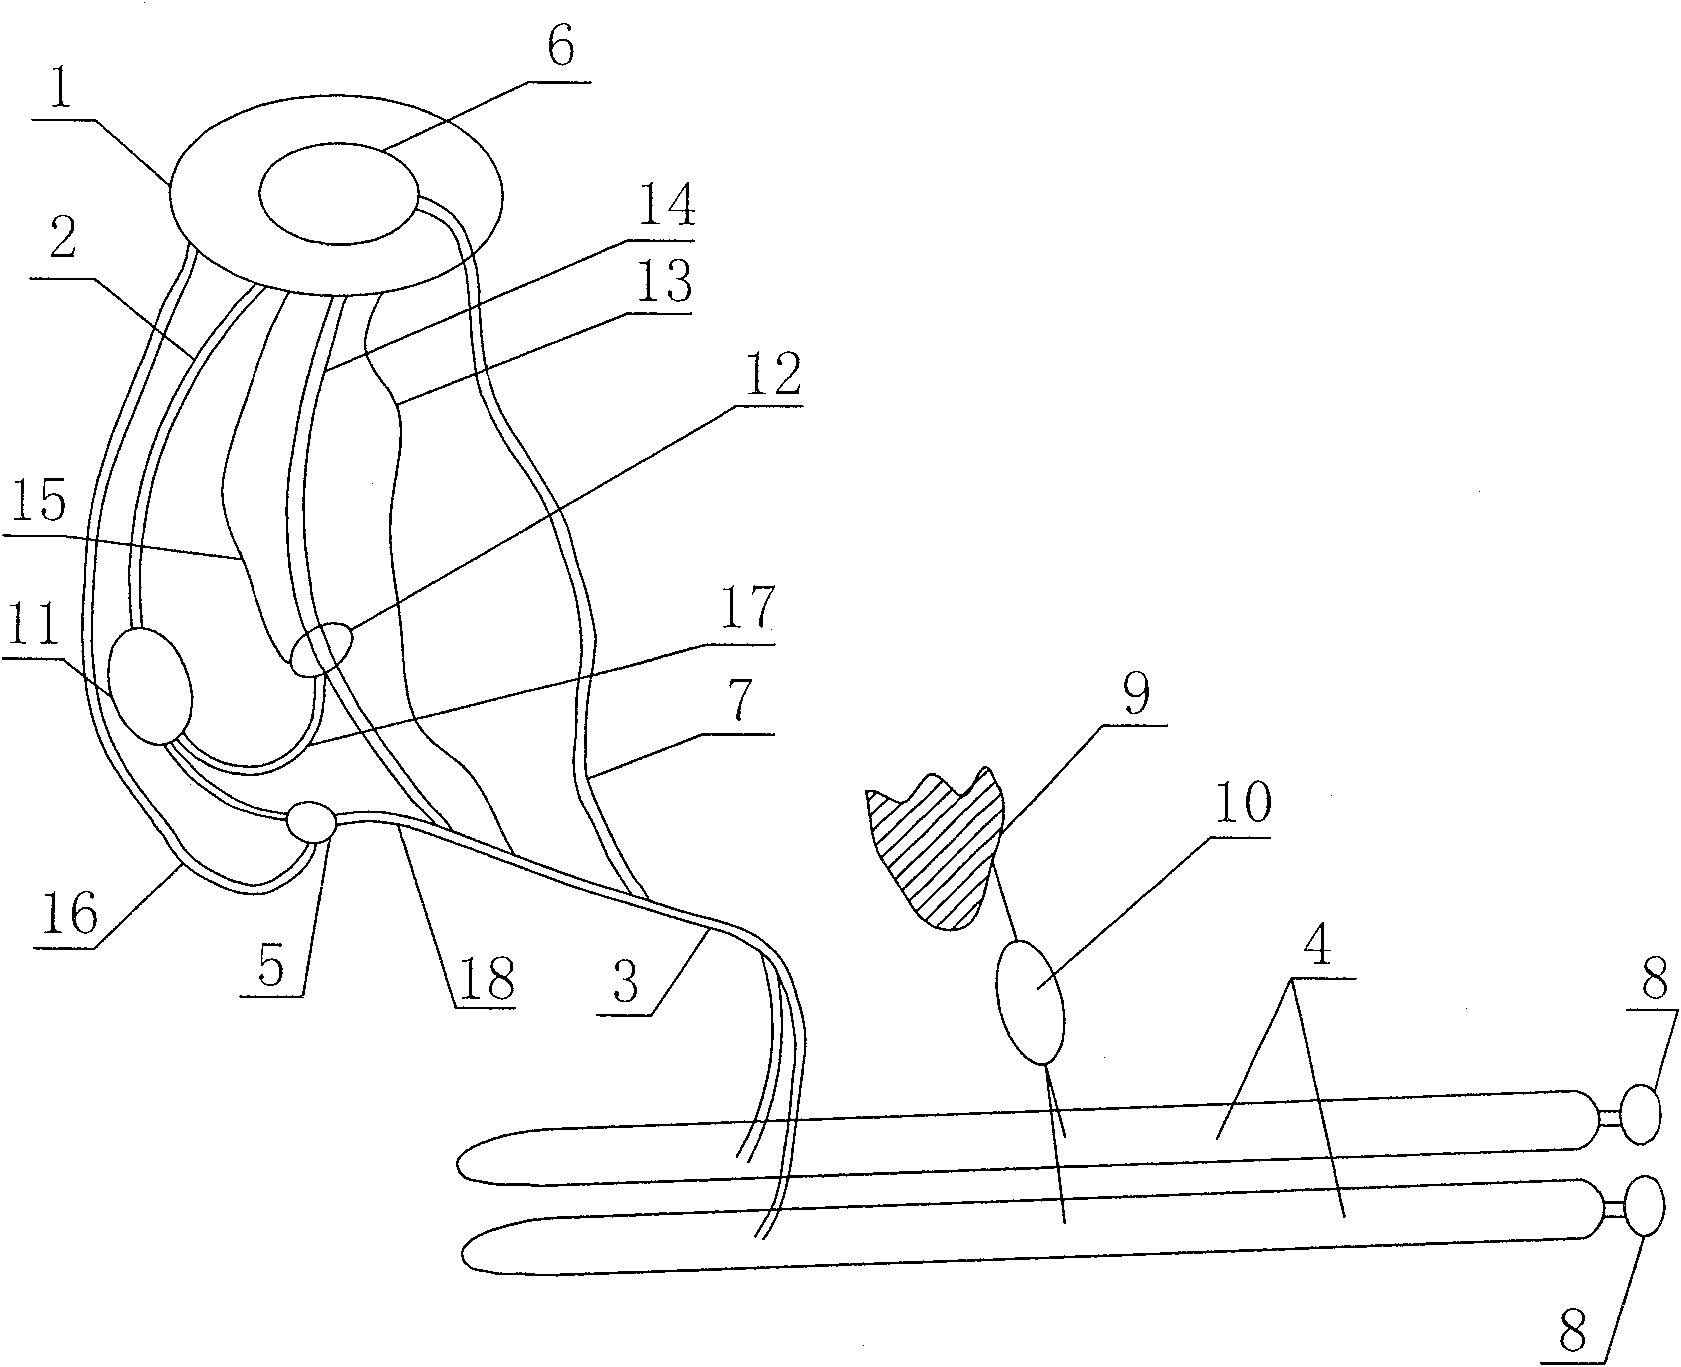 Automatic expanding device for implantation in human body